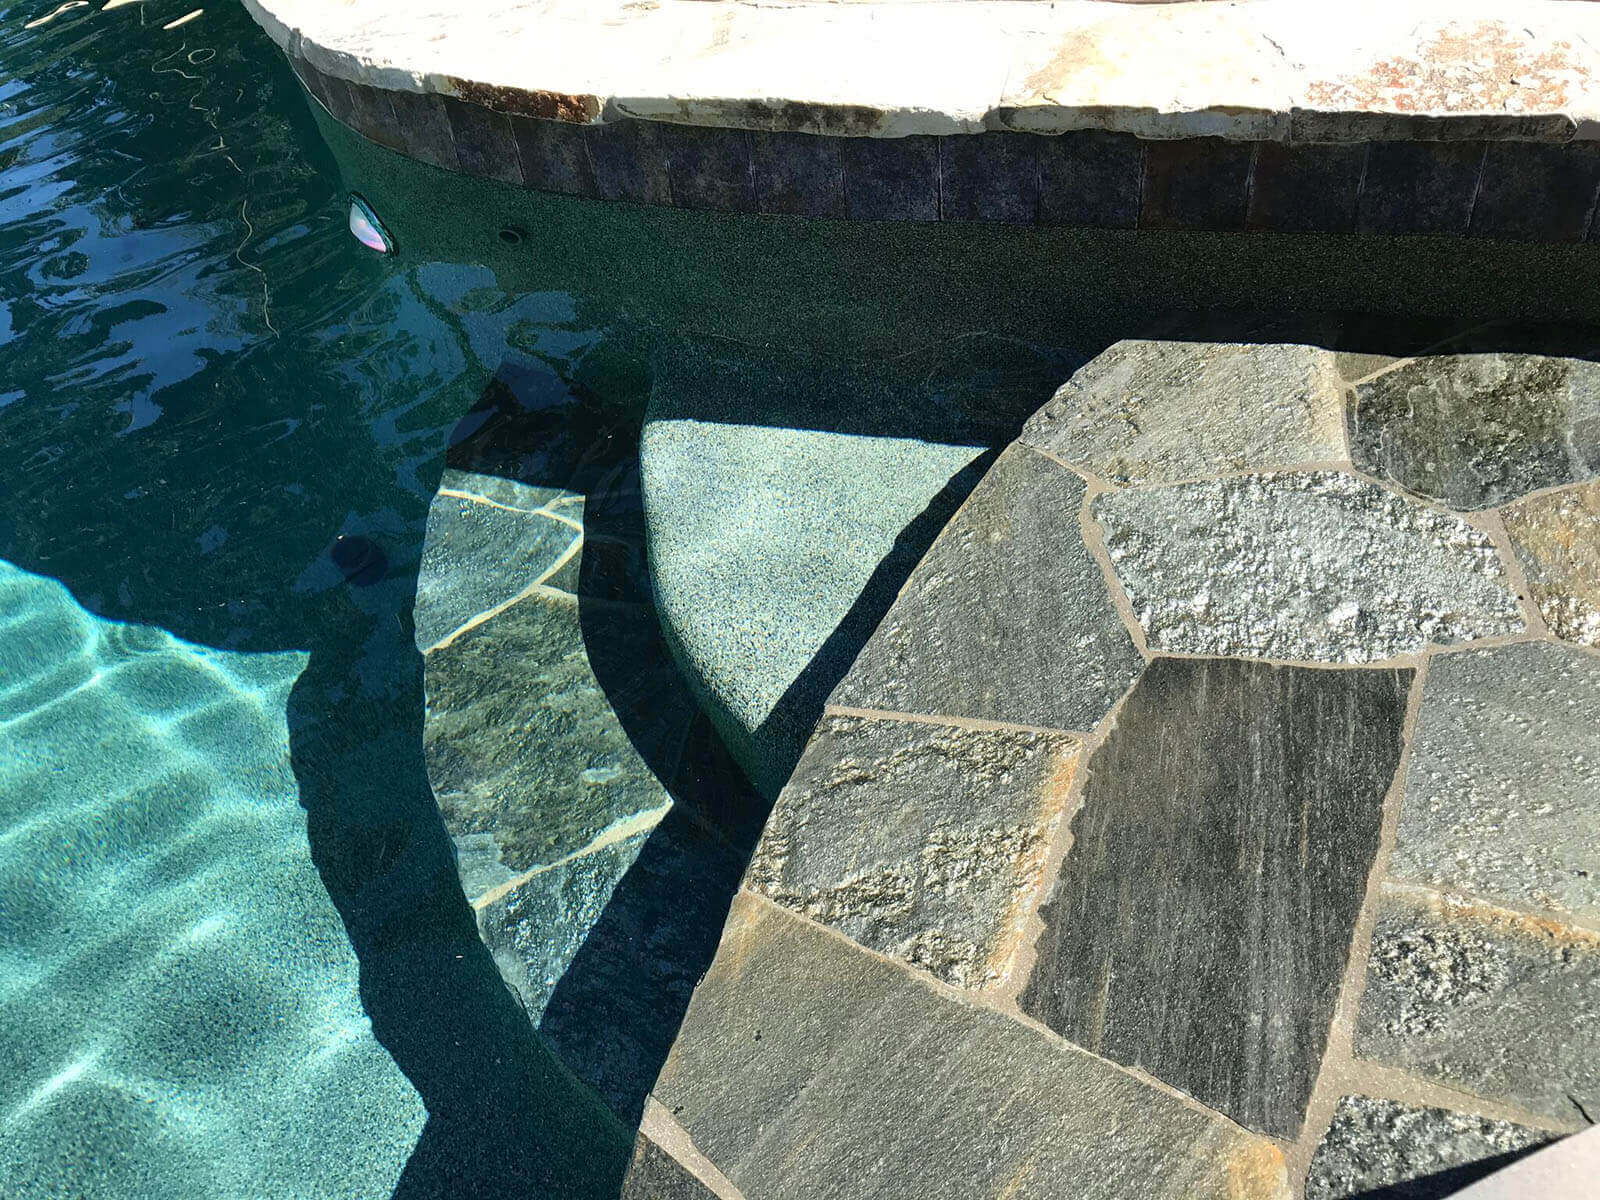 Stone steps lead down into inviting pool